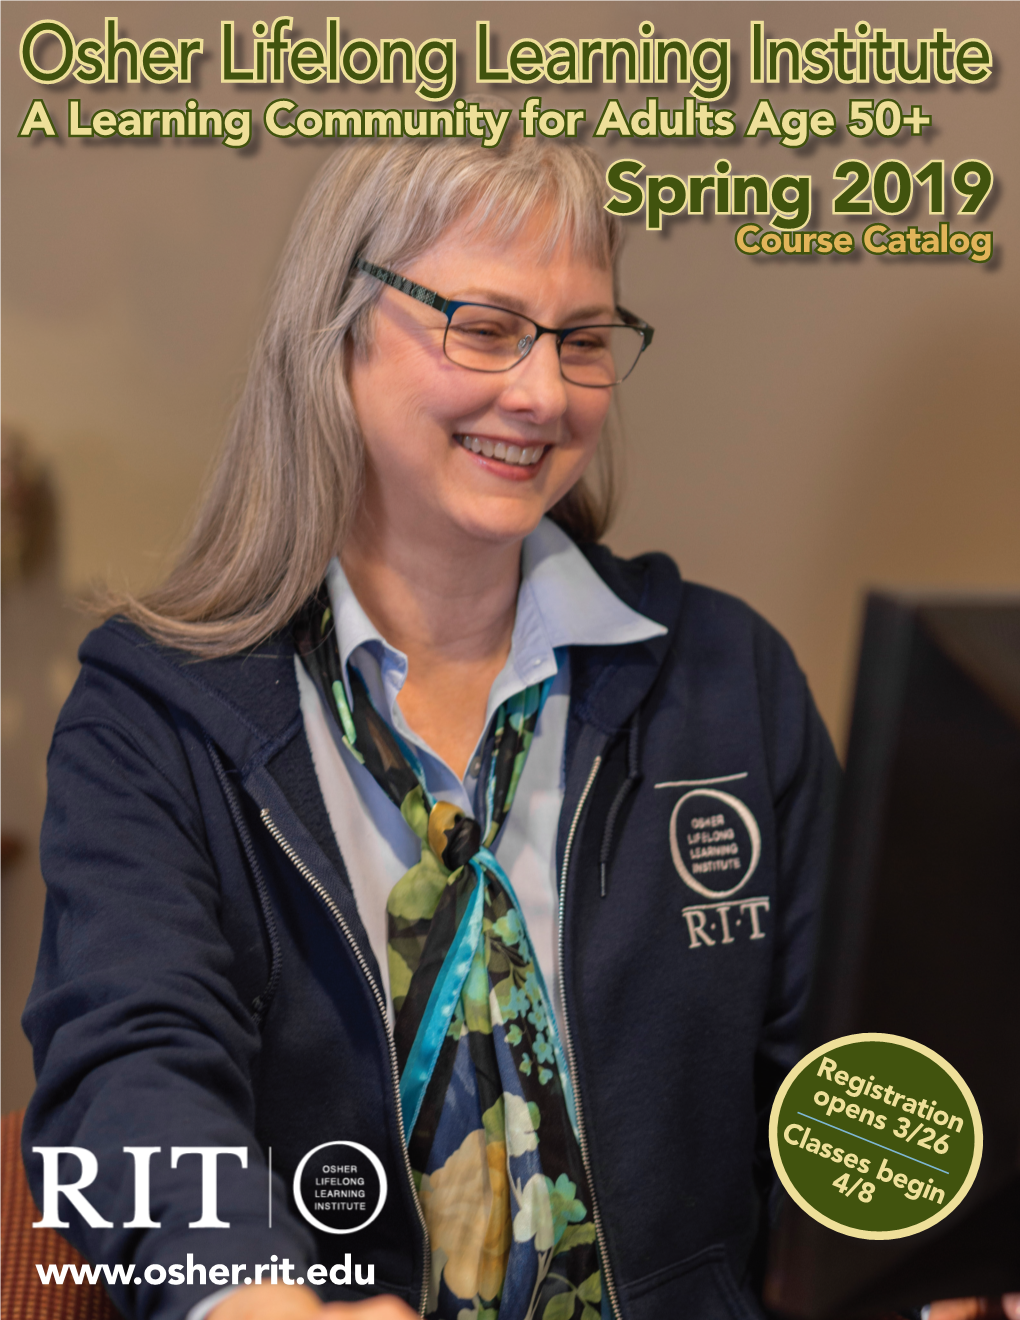 Osher Lifelong Learning Institute a Learning Community for Adults Age 50+ Spring 2019 Course Catalog